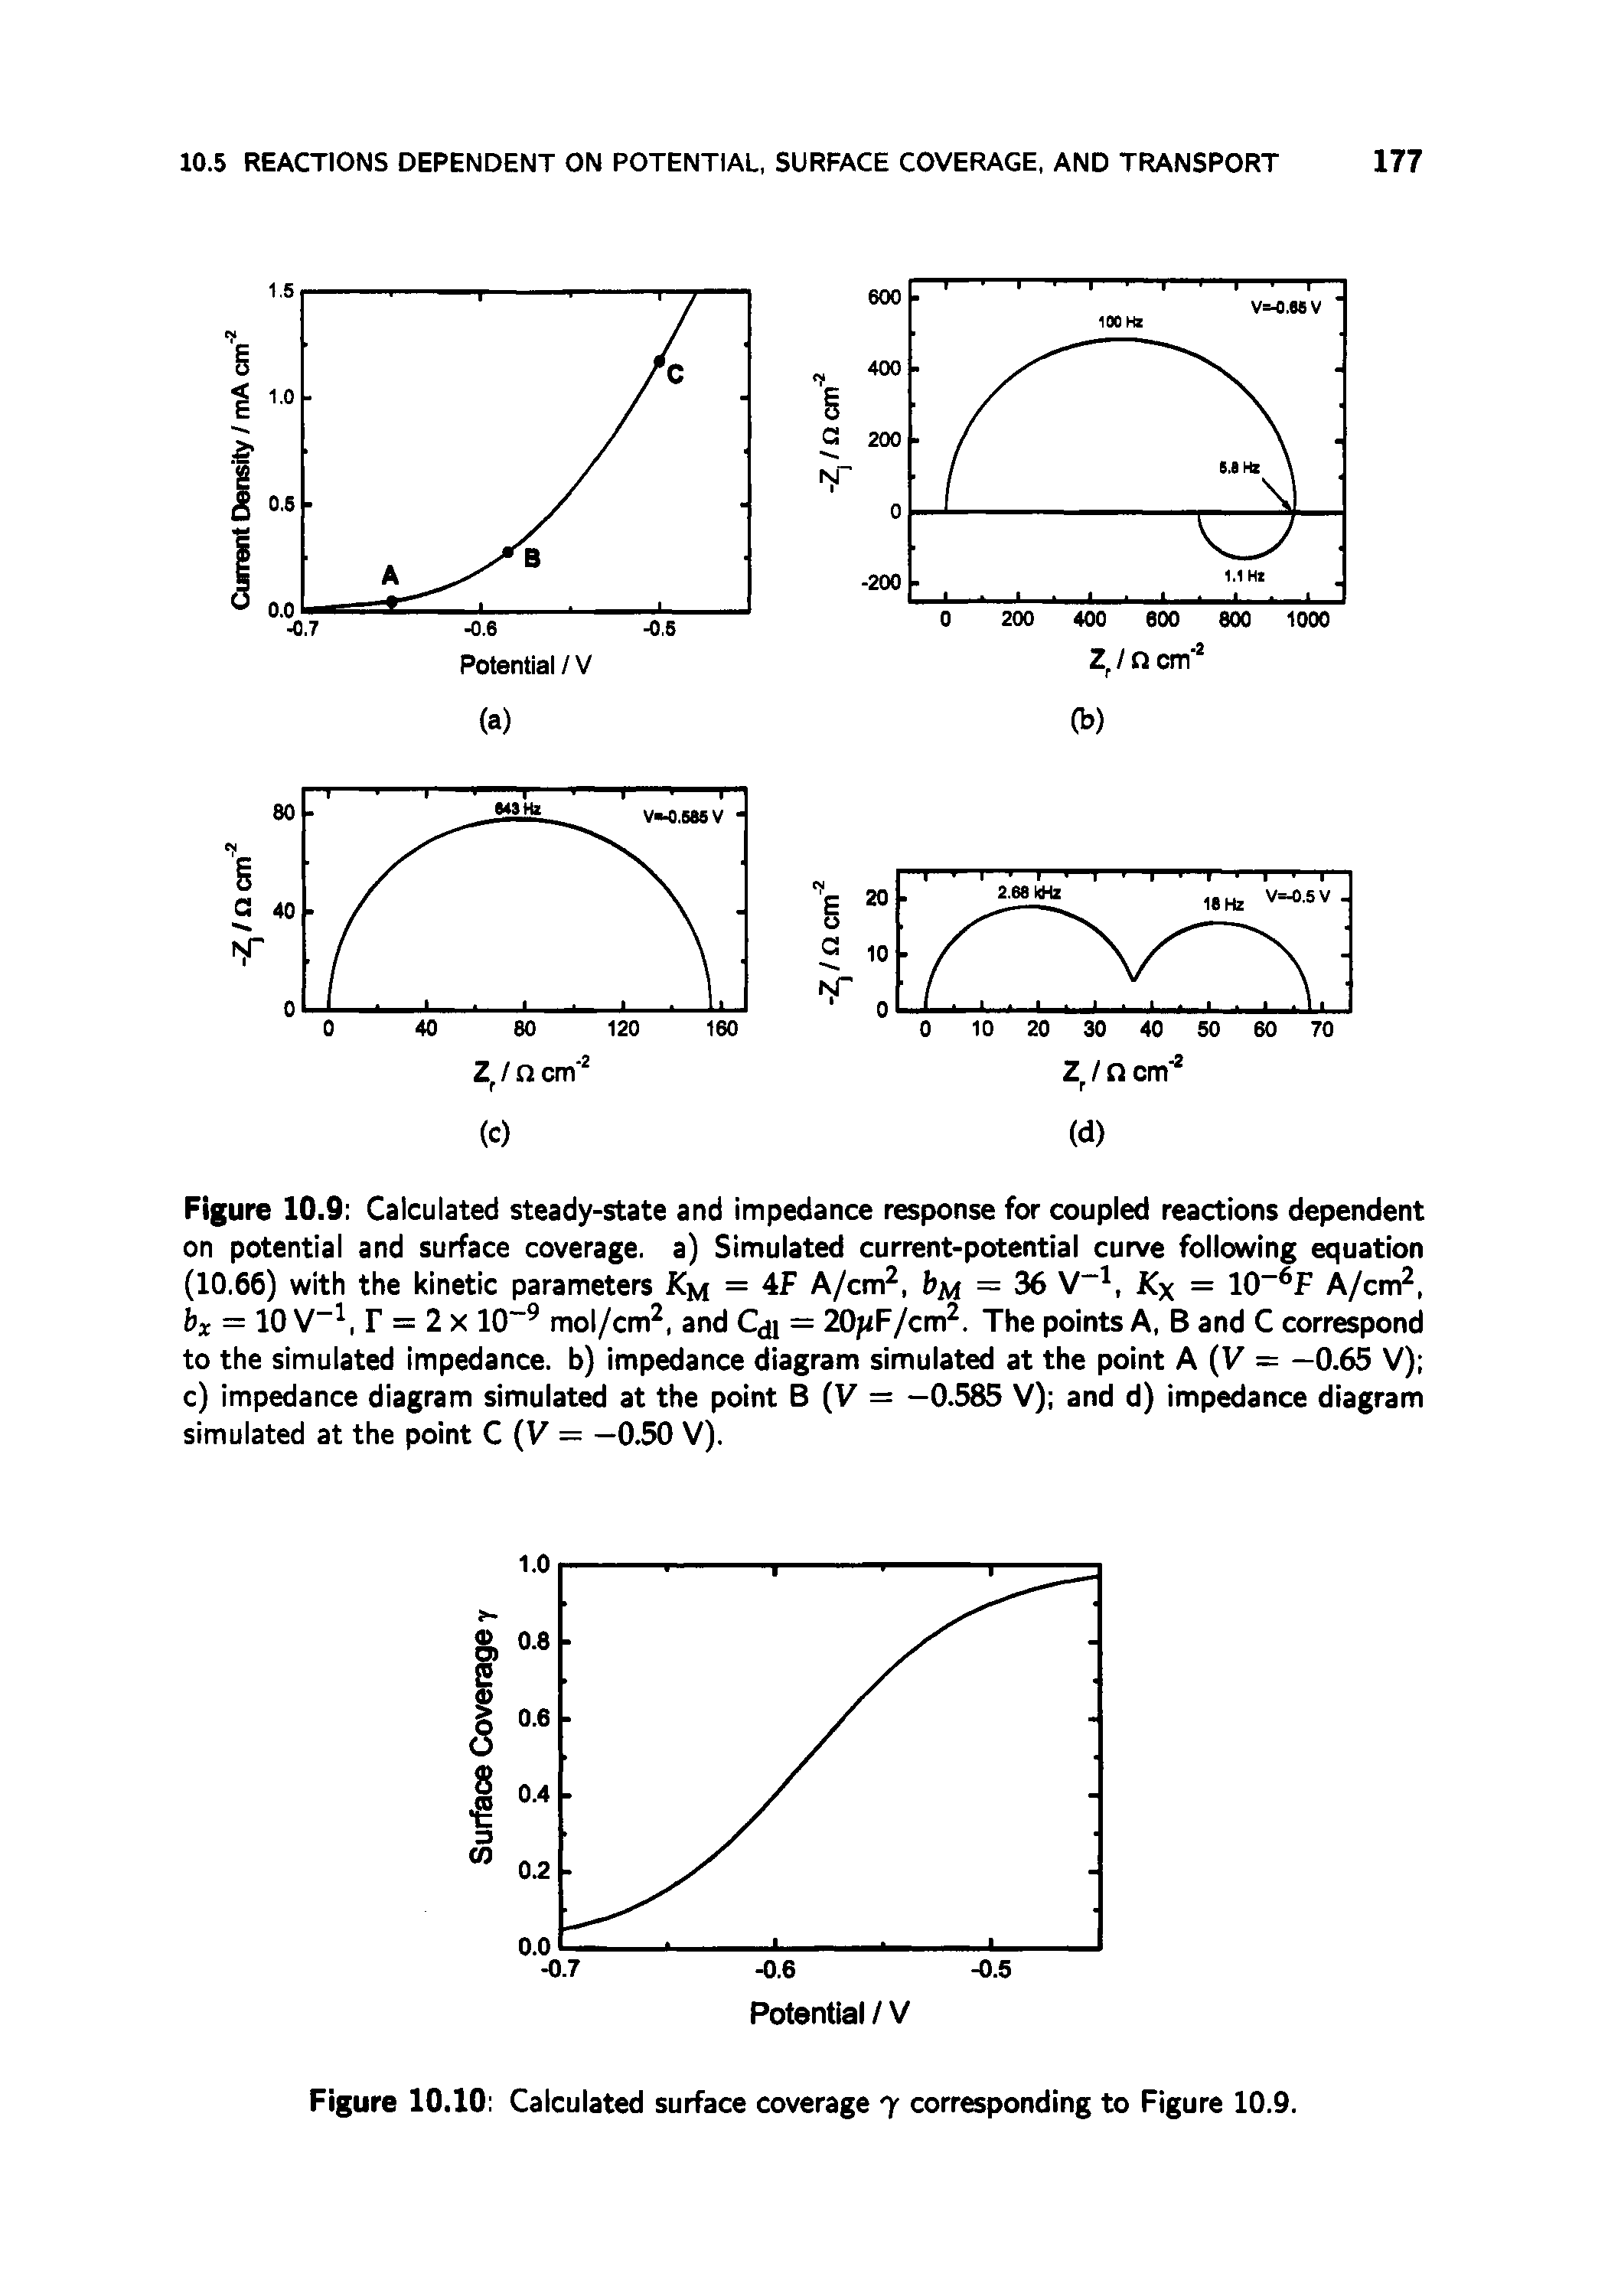 Figure 10.9 Calculated steady-state and impedance response for coupled reactions dependent on potential and surface coverage, a) Simulated current-potential curve following equation (10.66) with the kinetic parameters = 4F A/cm, — 36 V, Kx = 10 F A/cm, bx = 10 V r = 2 X 10 mol/cm, and Cji = 20jiF/cm. The points A, B and C correspond to the simulated impedance, b) impedance diagram simulated at the point A (V = —0.65 V) c) impedance diagram simulated at the point B (V = —0.585 V) and d) impedance diagram simulated at the point C V — —0.50 V).